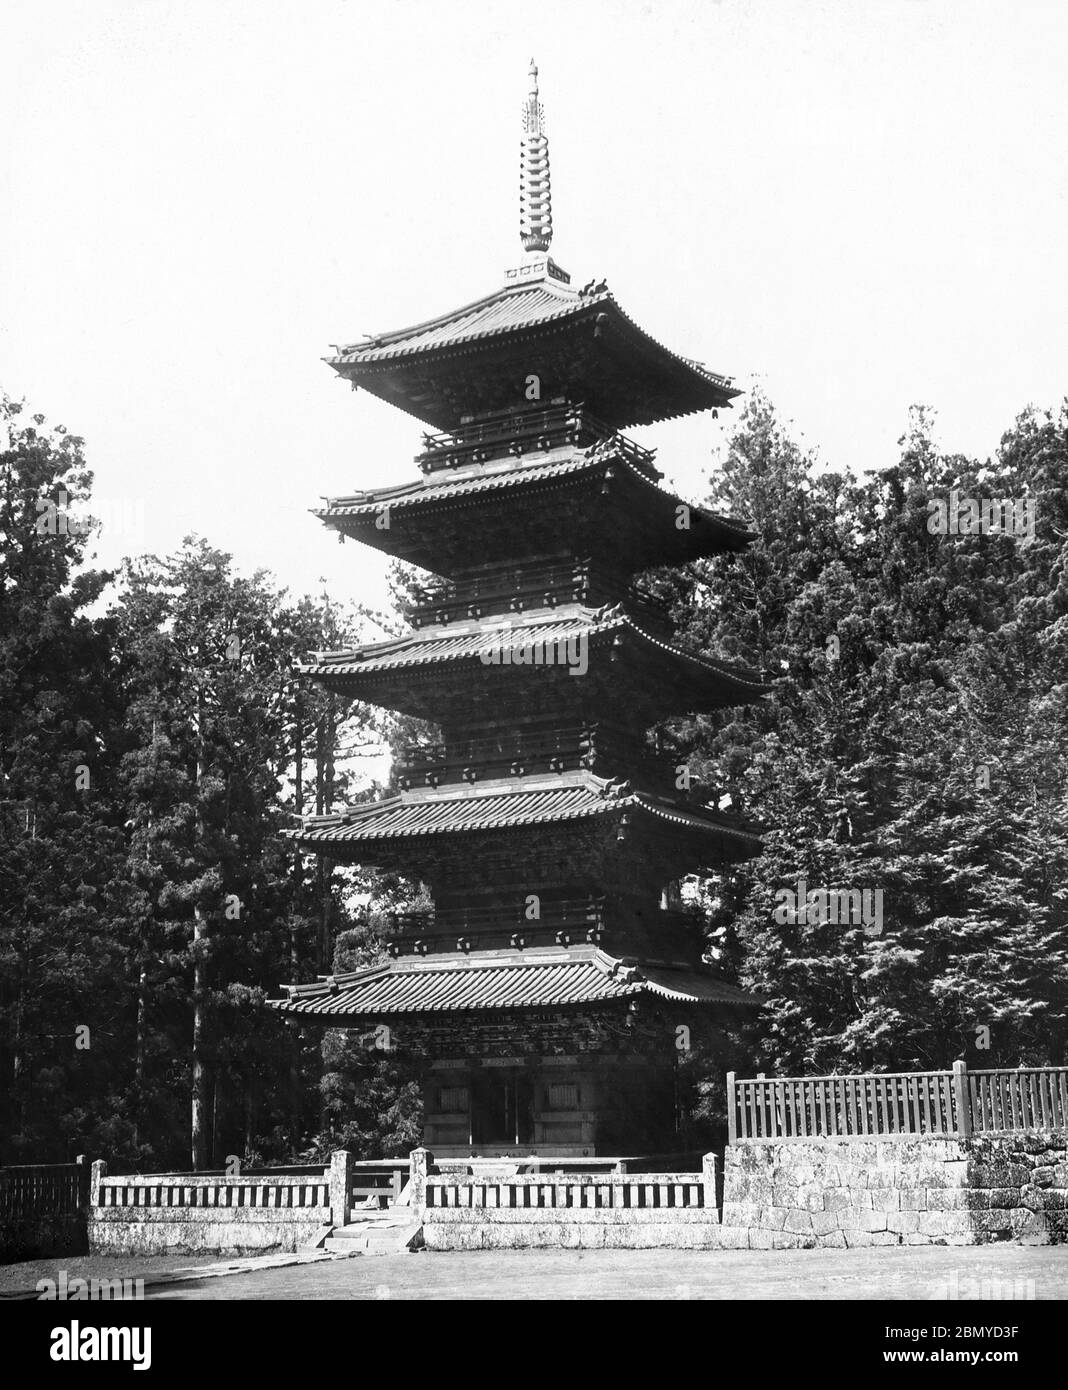 [ 1890s Japan - Japanese Pagoda, Nikko ] —   Five-storied pagoda in Nikko, Tochigi Prefecture.  From a series of glass slides published (but not photographed) by Scottish photographer George Washington Wilson (1823–1893). Wilson’s firm was one of the largest publishers of photographic prints in the world.  19th century vintage glass slide. Stock Photo